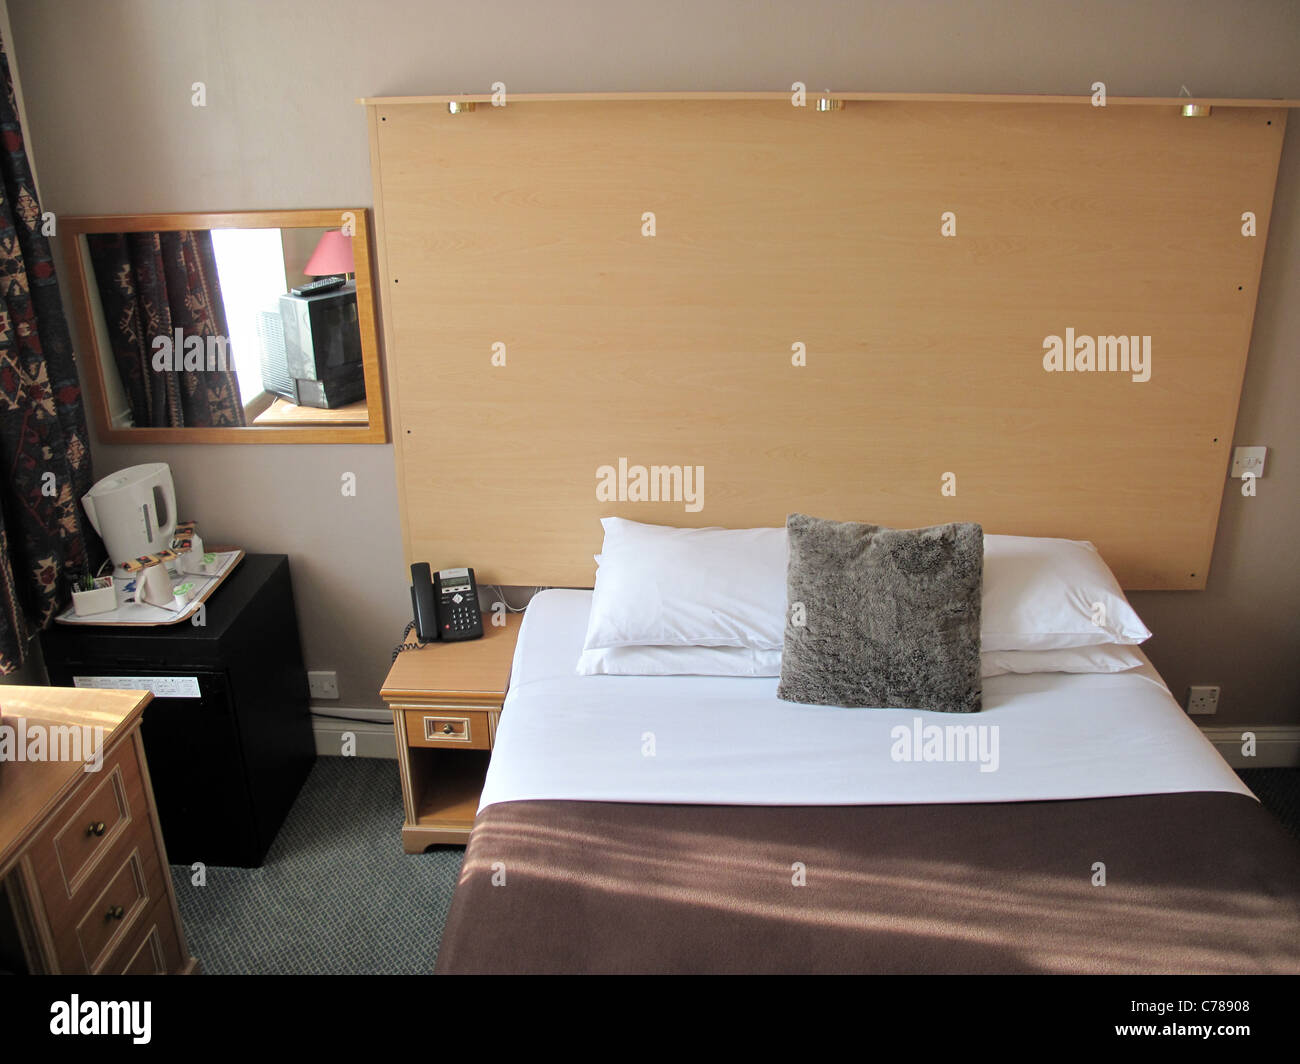 Cheap hotel room bed and mirror and table Stock Photo